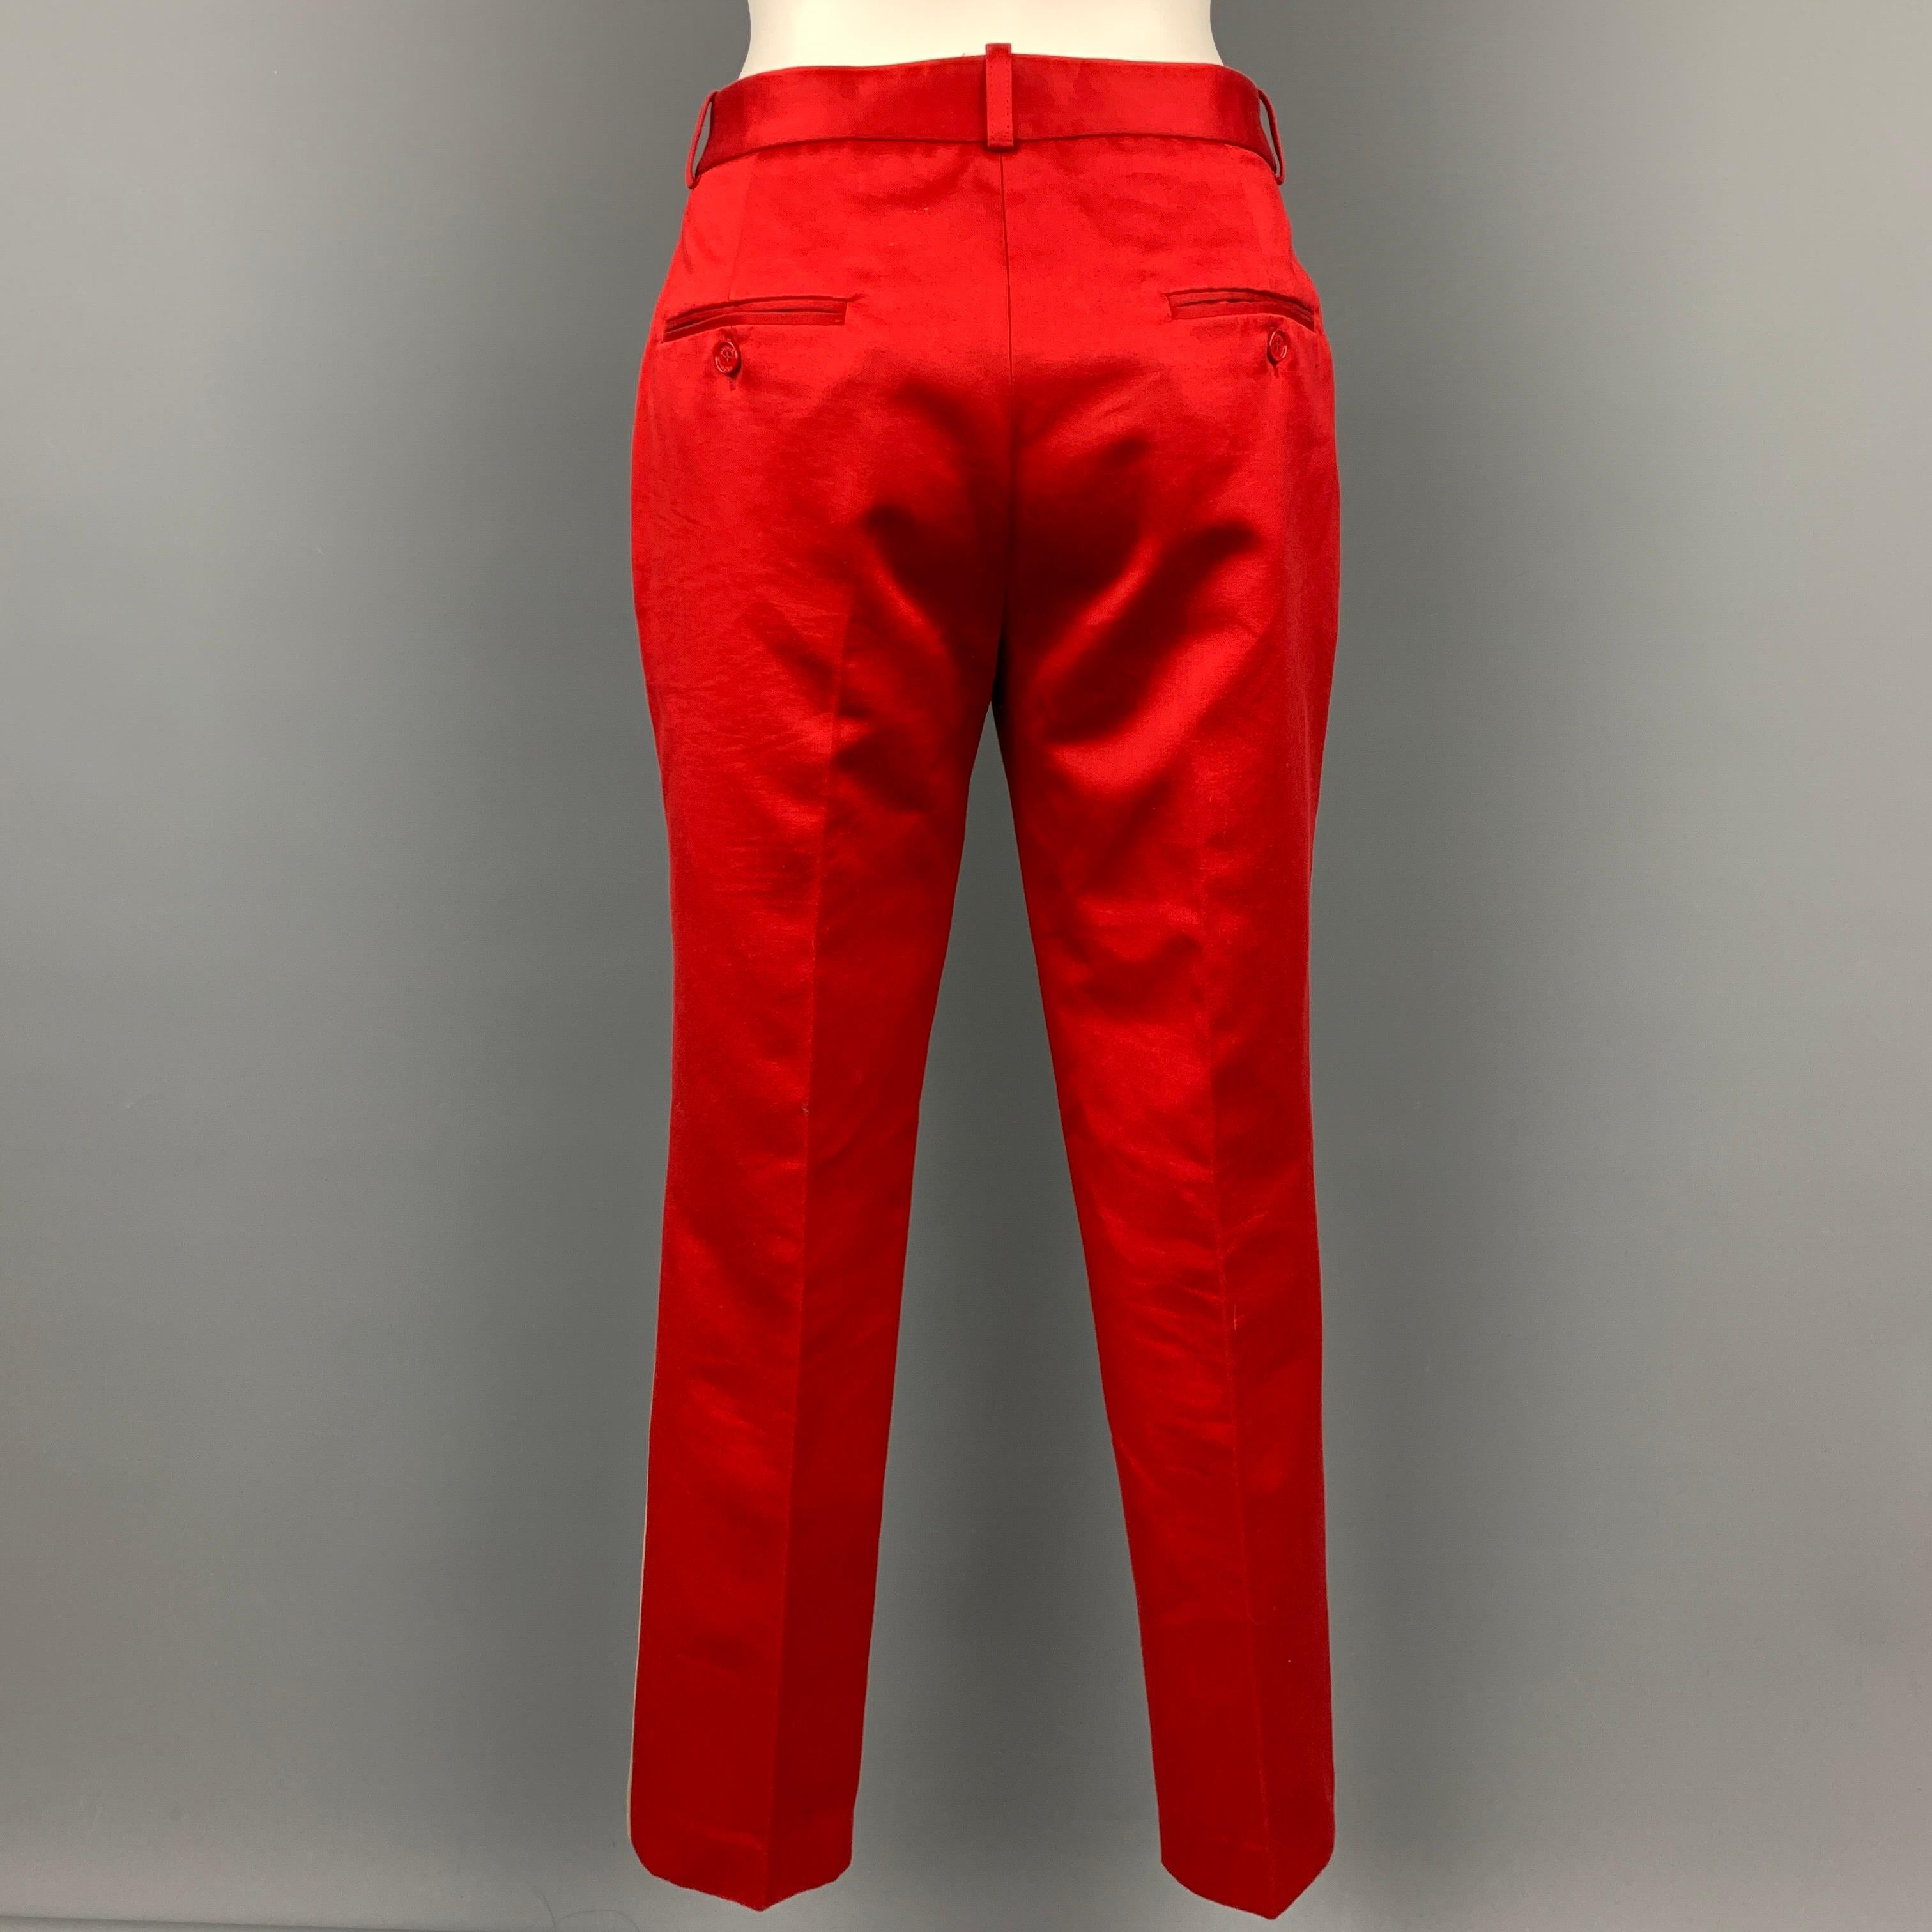 MICHAEL KORS dress pants comes in a khaki & red color block cotton featuring a narrow leg, slit pockets, and a zip fly closure. Made in Italy.

Very Good Pre-Owned Condition.
Marked: 6

Measurements:

Waist: 30 in.
Rise: 9.5 in.
Inseam: 29 in. 